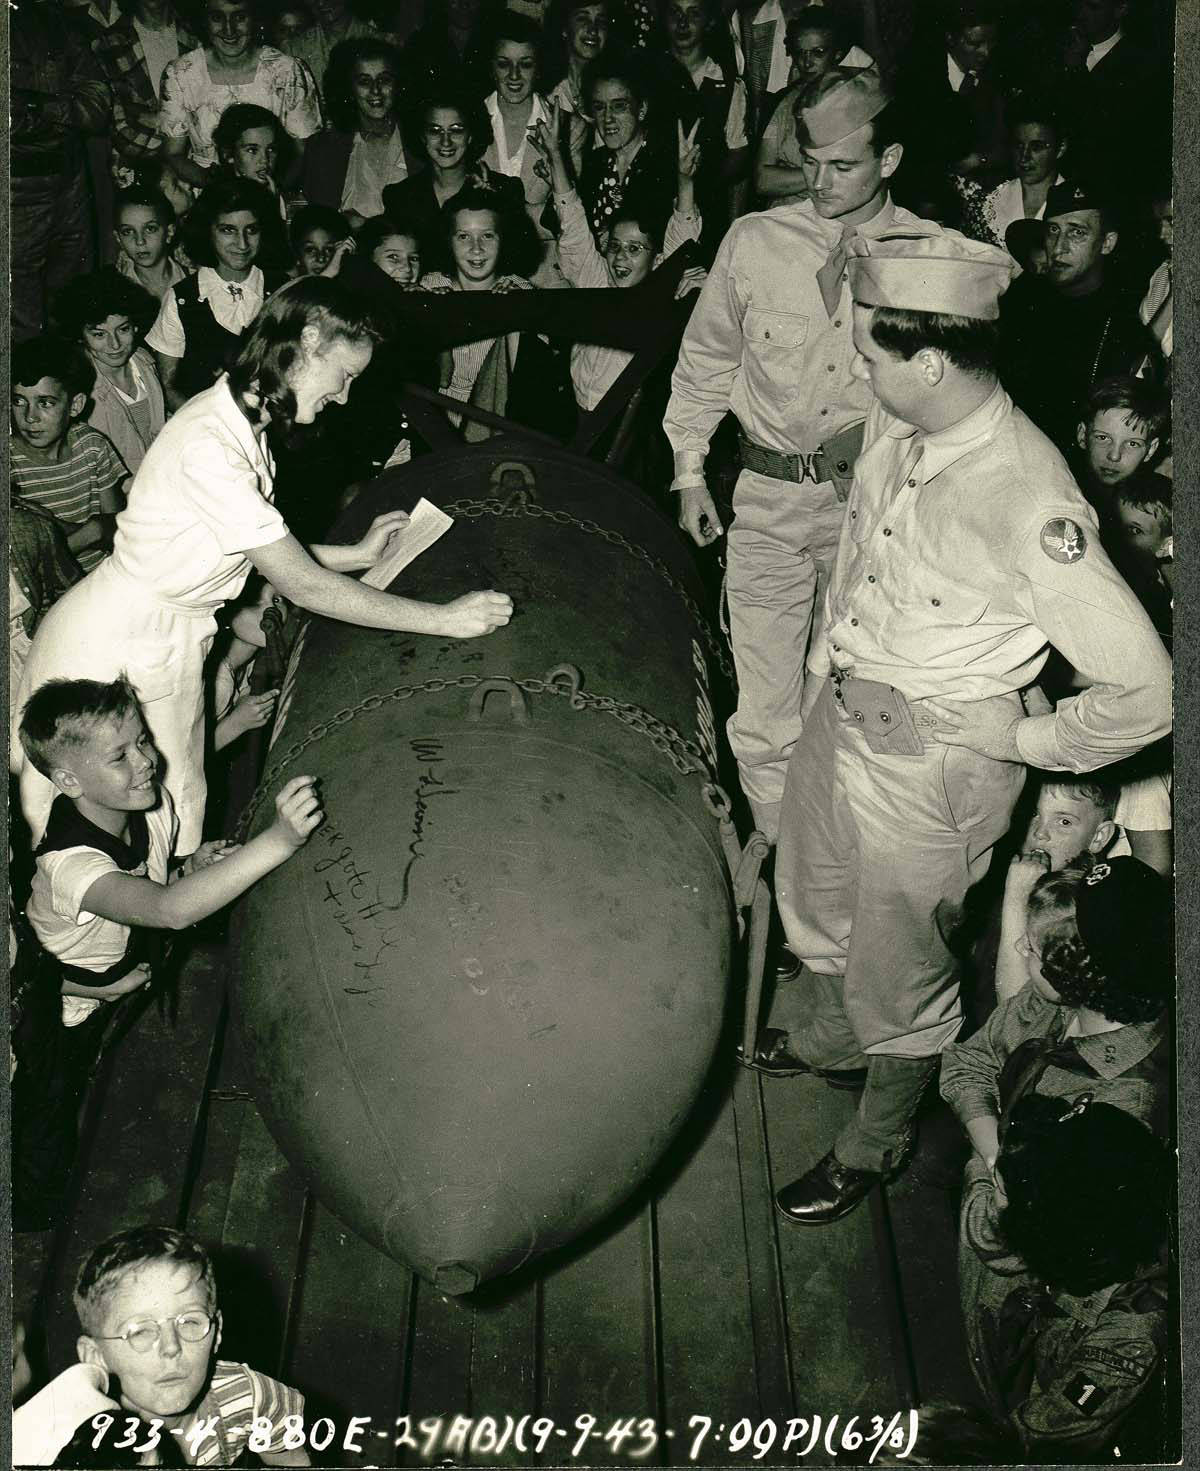 Children write messages on a blockbuster bomb, September 9, 1943. U.S. Army Air Corps, State Archives, Connecticut State Library. Used with permission.